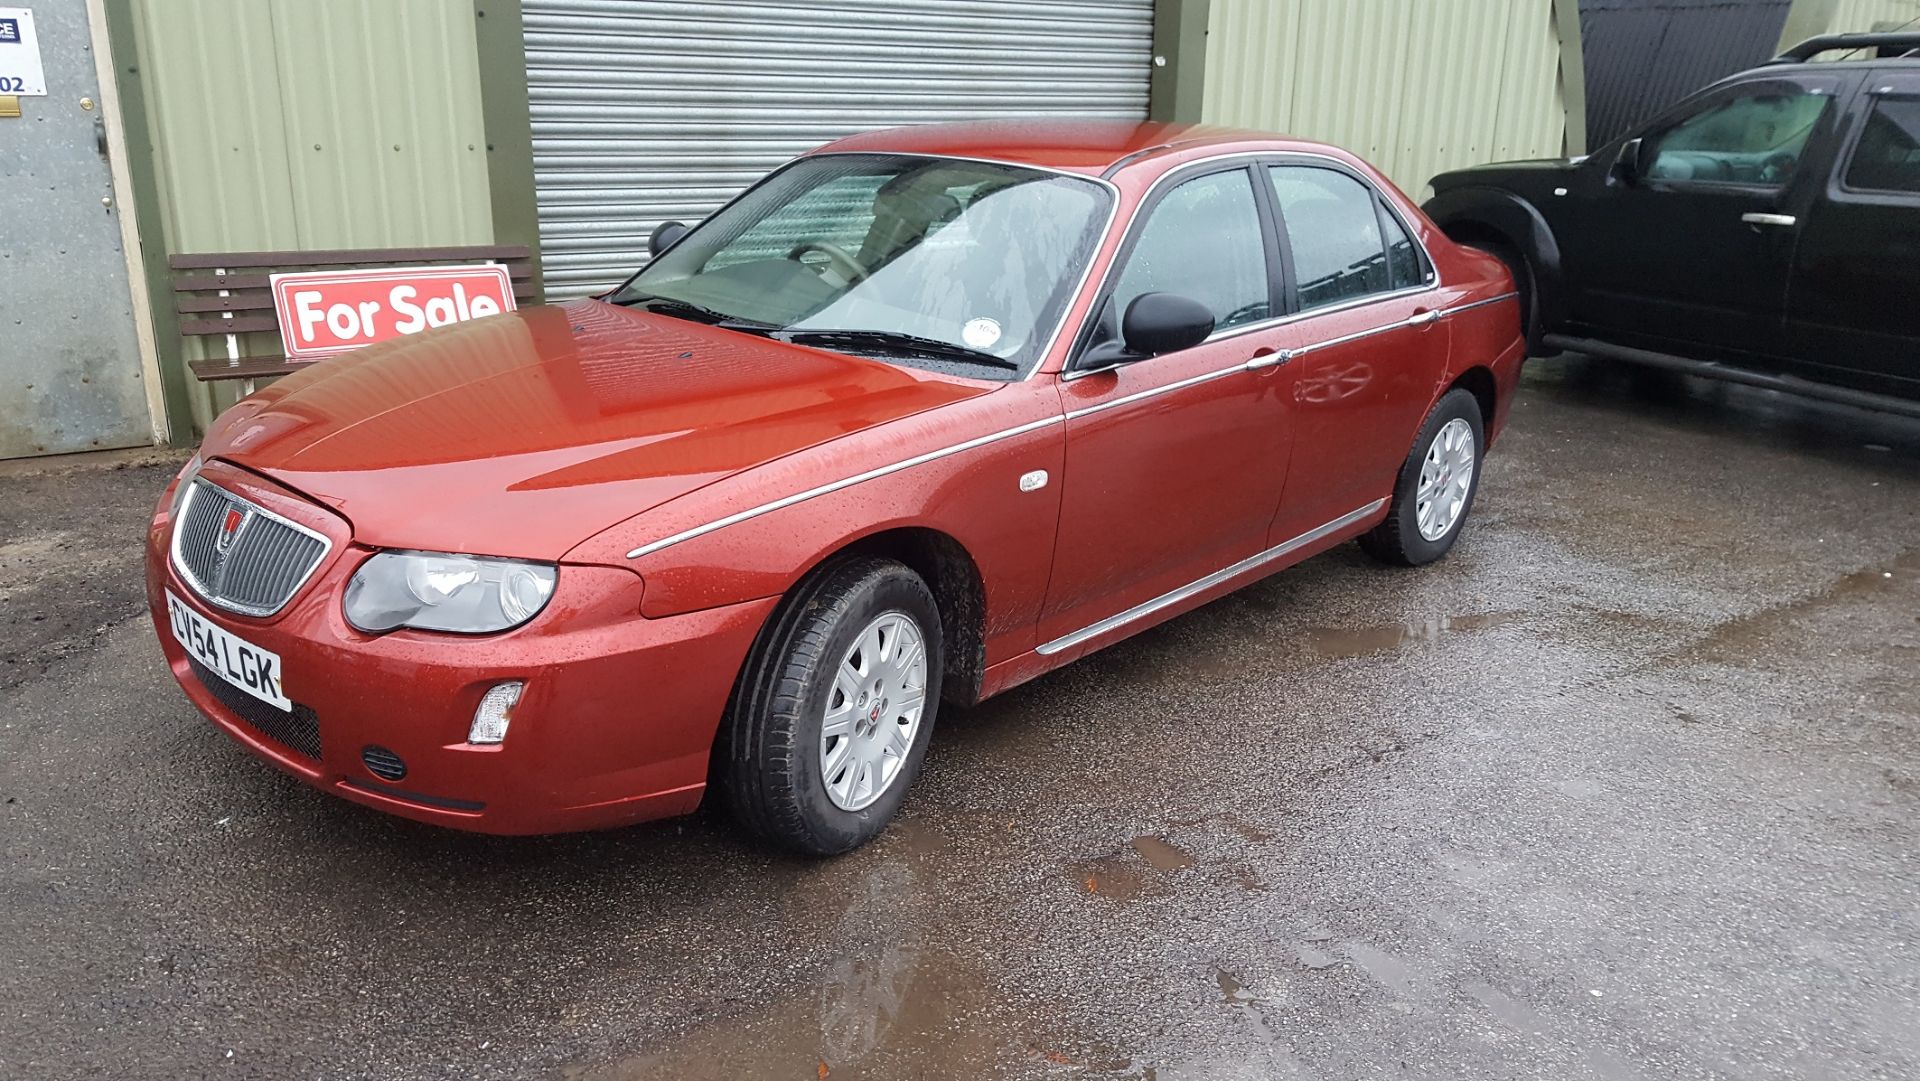 LOW MILES! 2004/54 REG ROVER 75 CLASSIC RED PETROL 4 DOOR SALOON, SHOWING 1 FORMER KEEPER *NO VAT* - Image 2 of 8